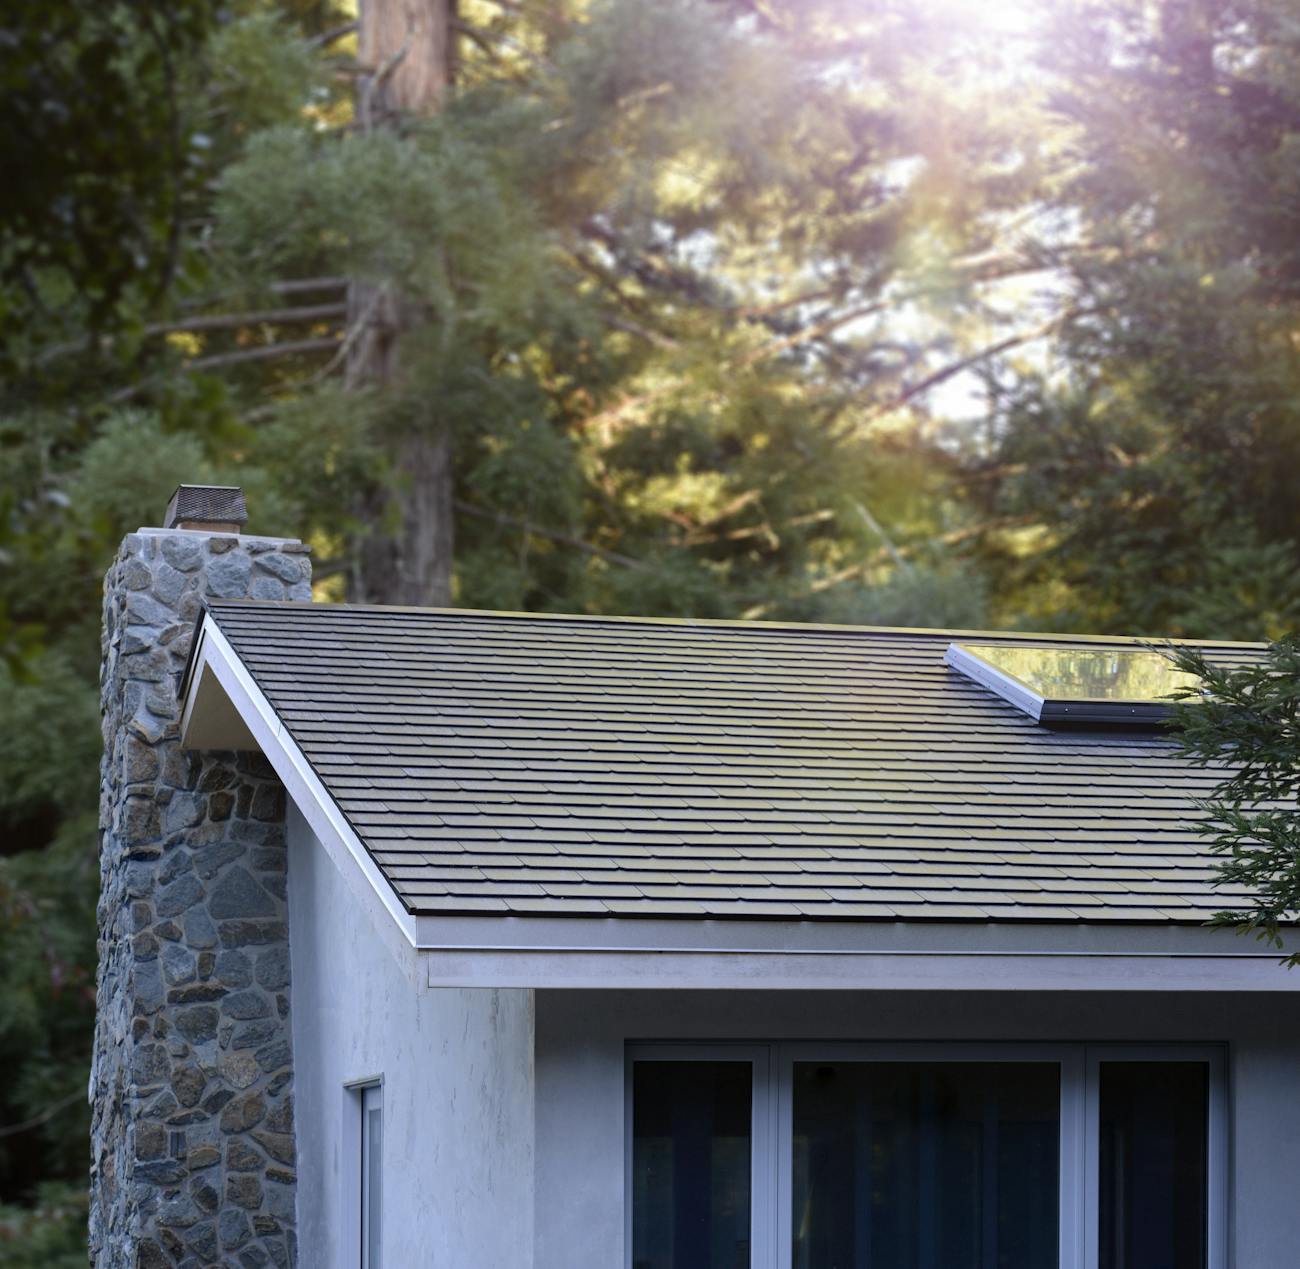 elon-musk-s-first-tesla-solar-roof-is-here-and-it-looks-amazing-inverse